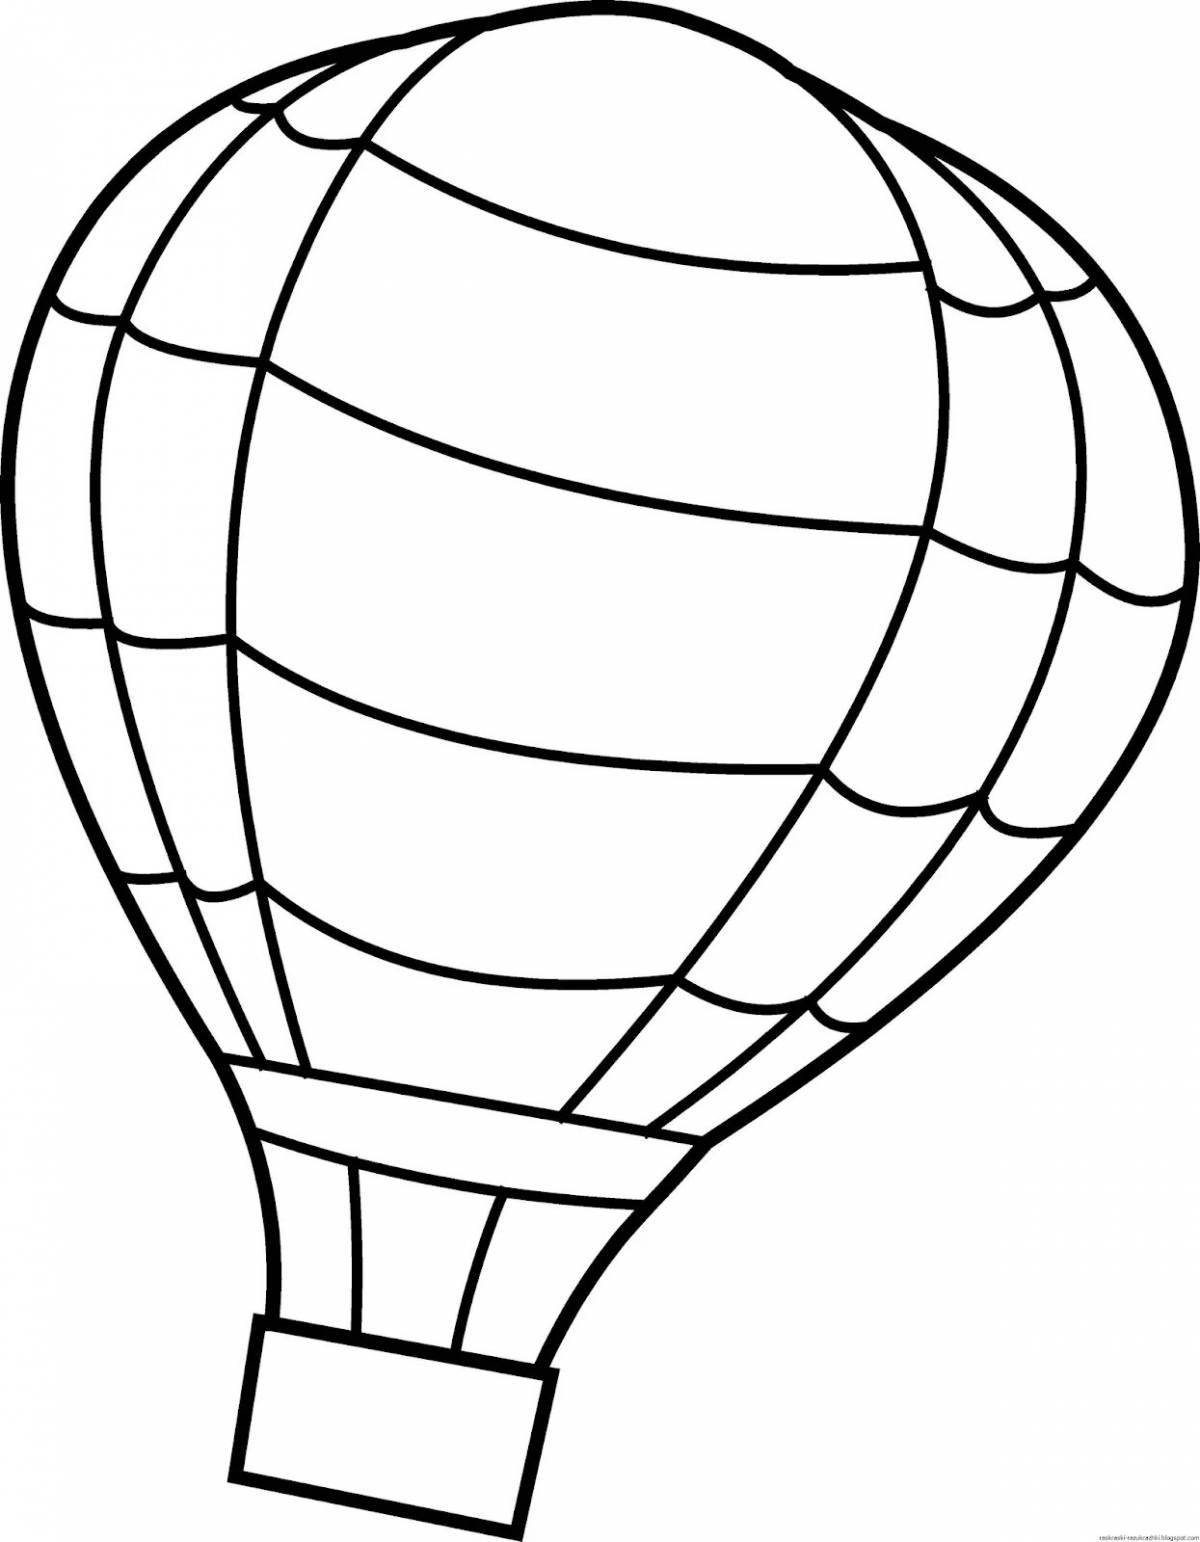 Coloring page with balloons for kids